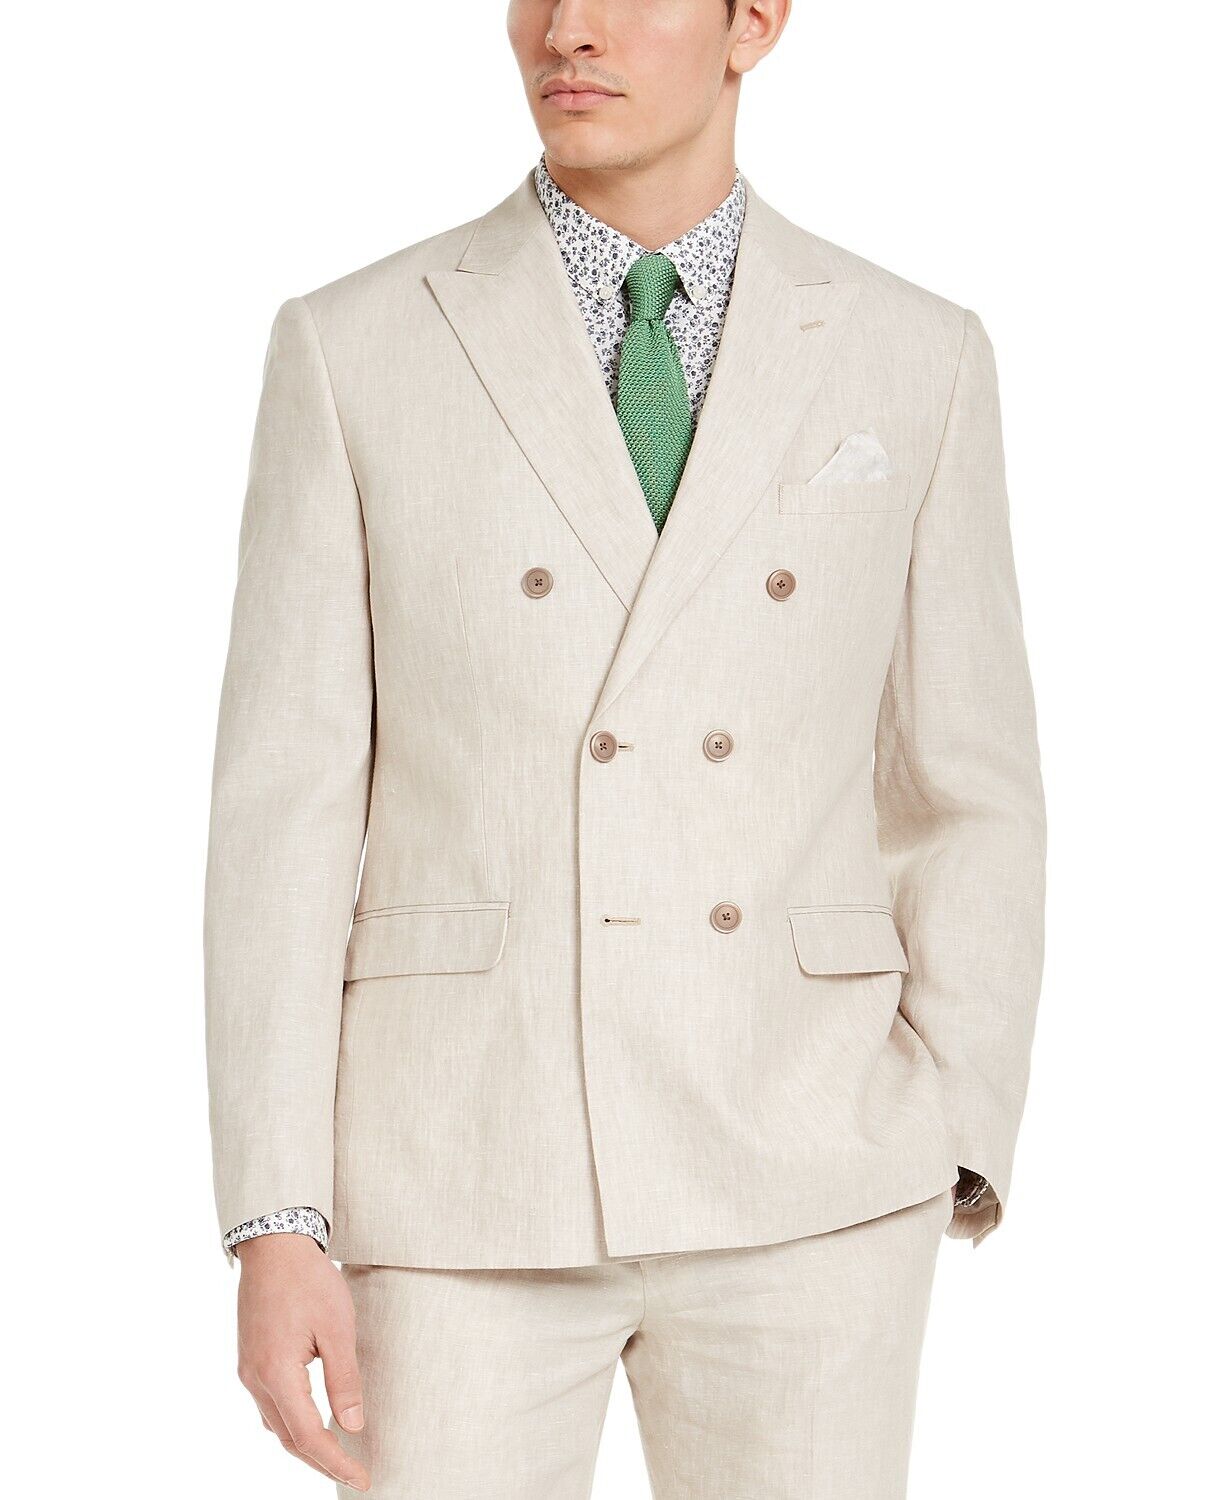 Bar III Men's Slim-Fit Tan Solid Double-Breasted Suit Jacket 44R Linen